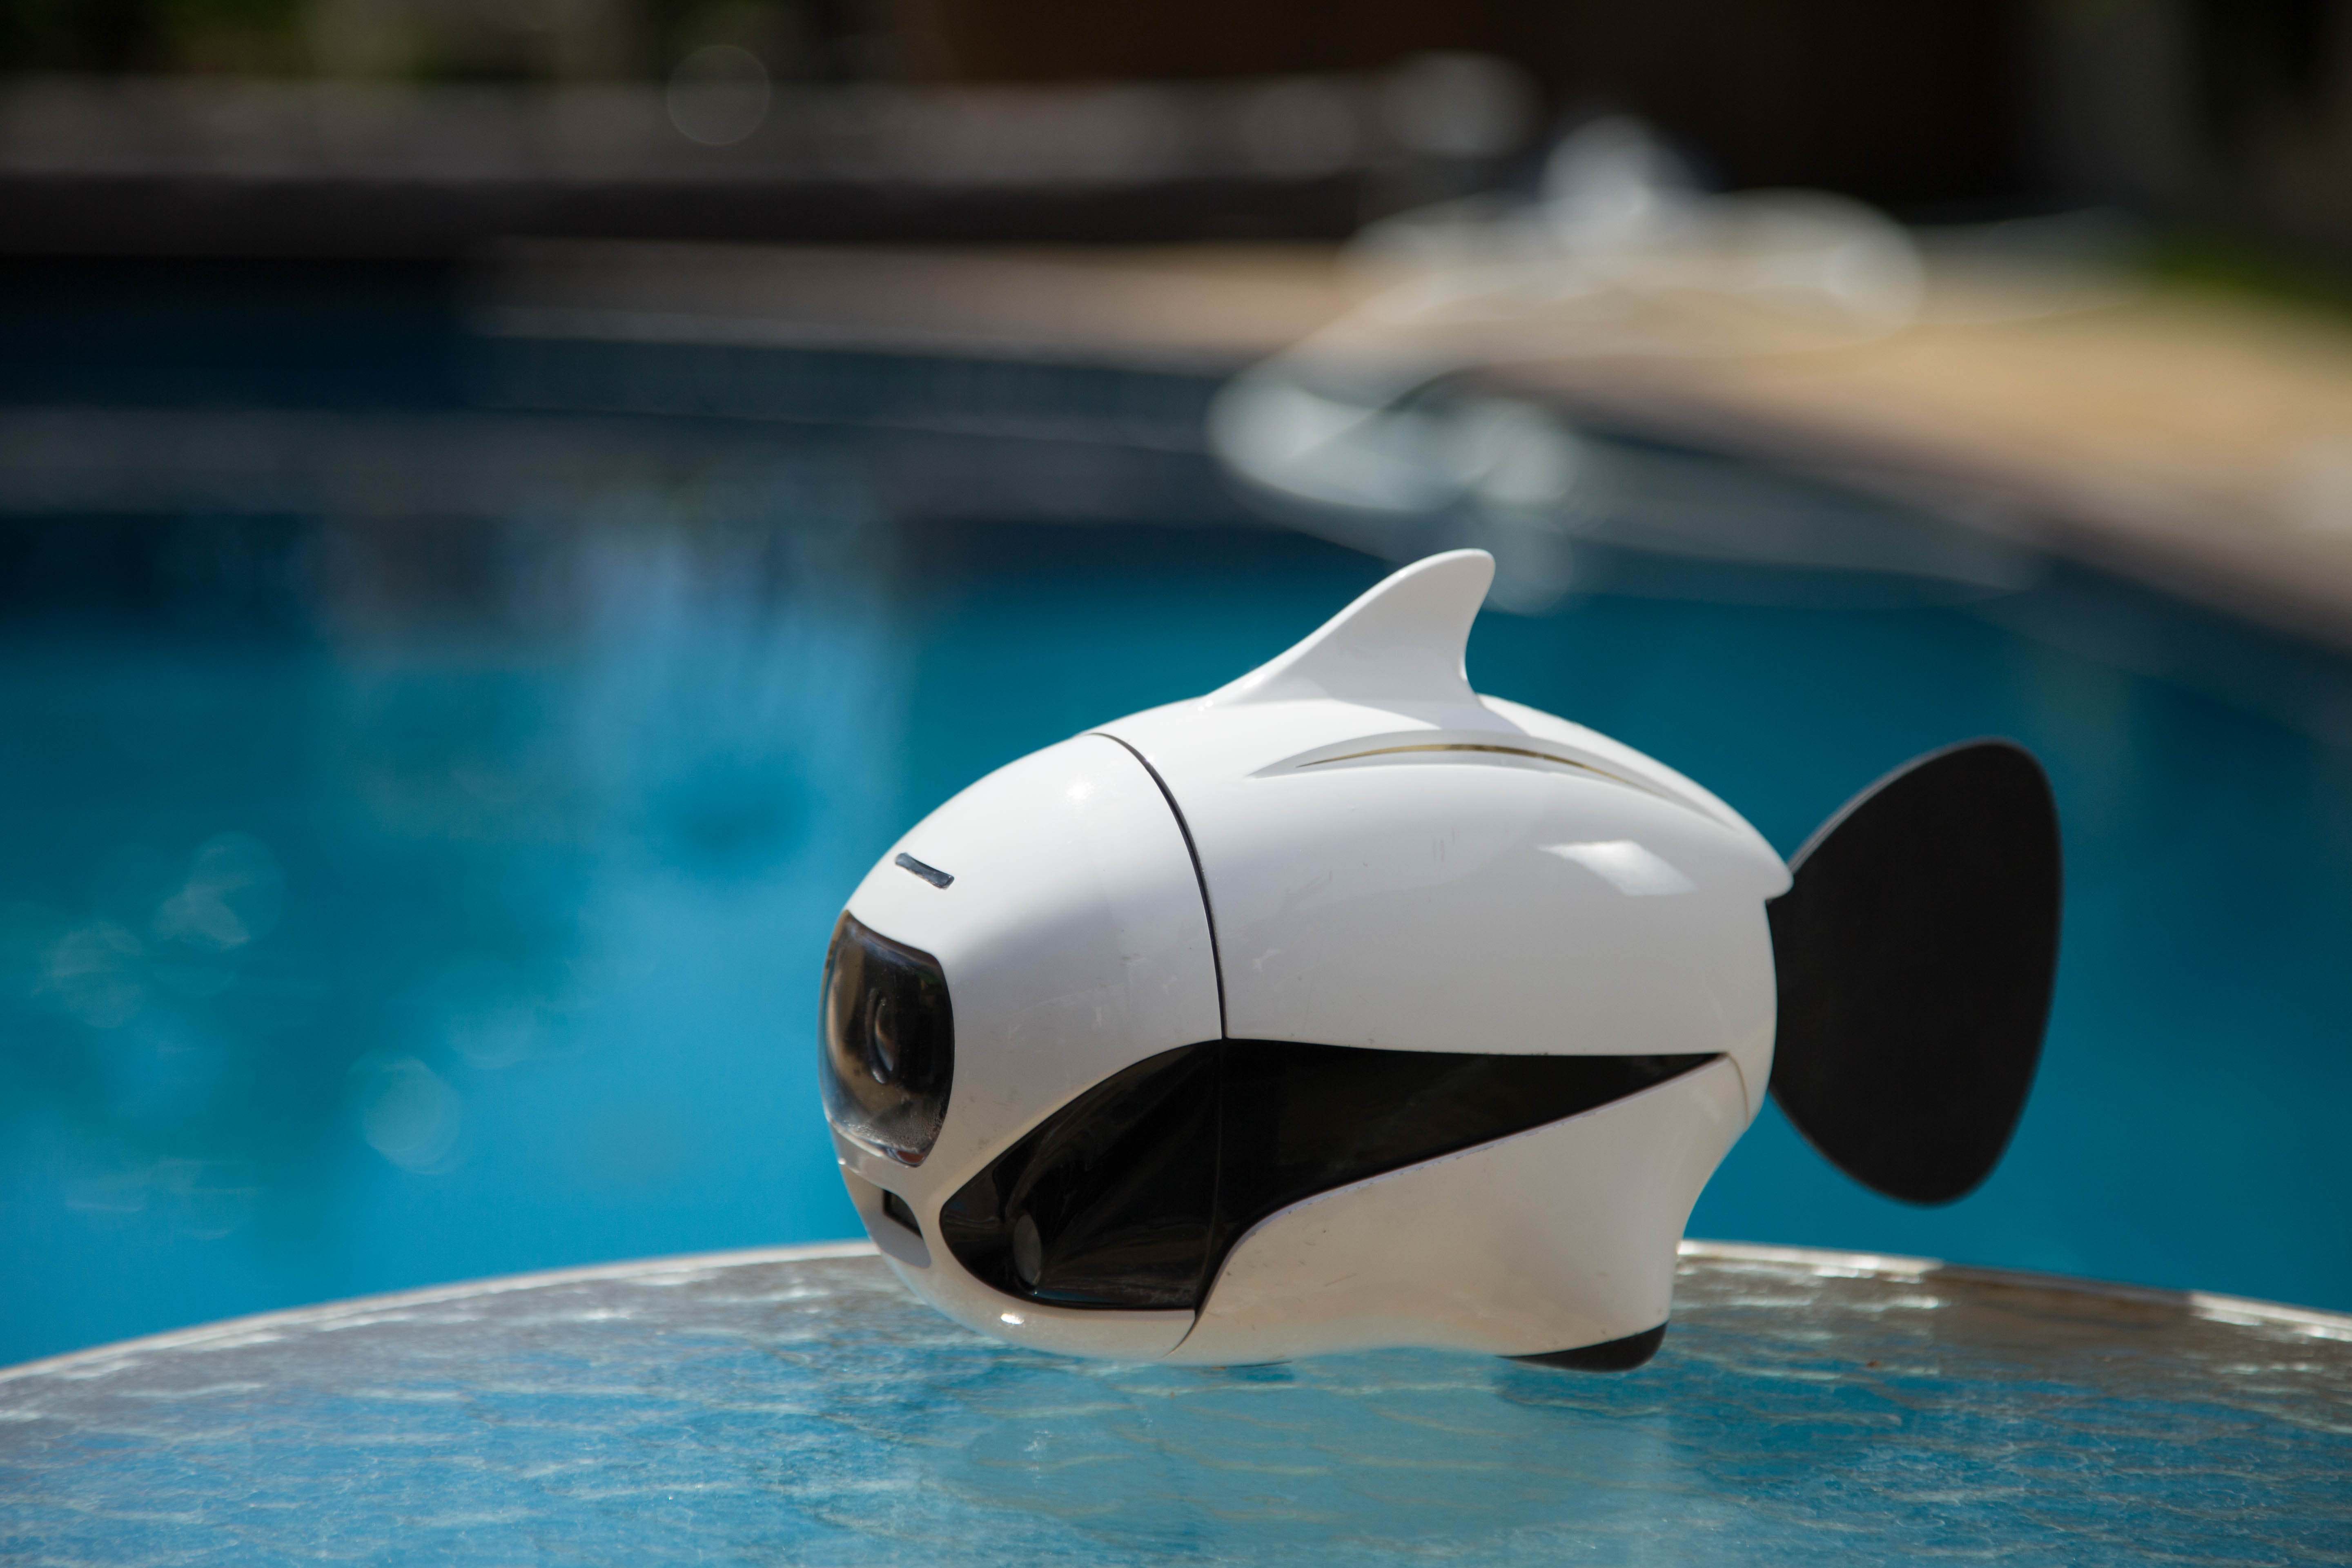 First Bionic Unmanned Underwater Drone/Camera is a Crowdfunding Sensation, Raising More Than $200,000 on Kickstarter